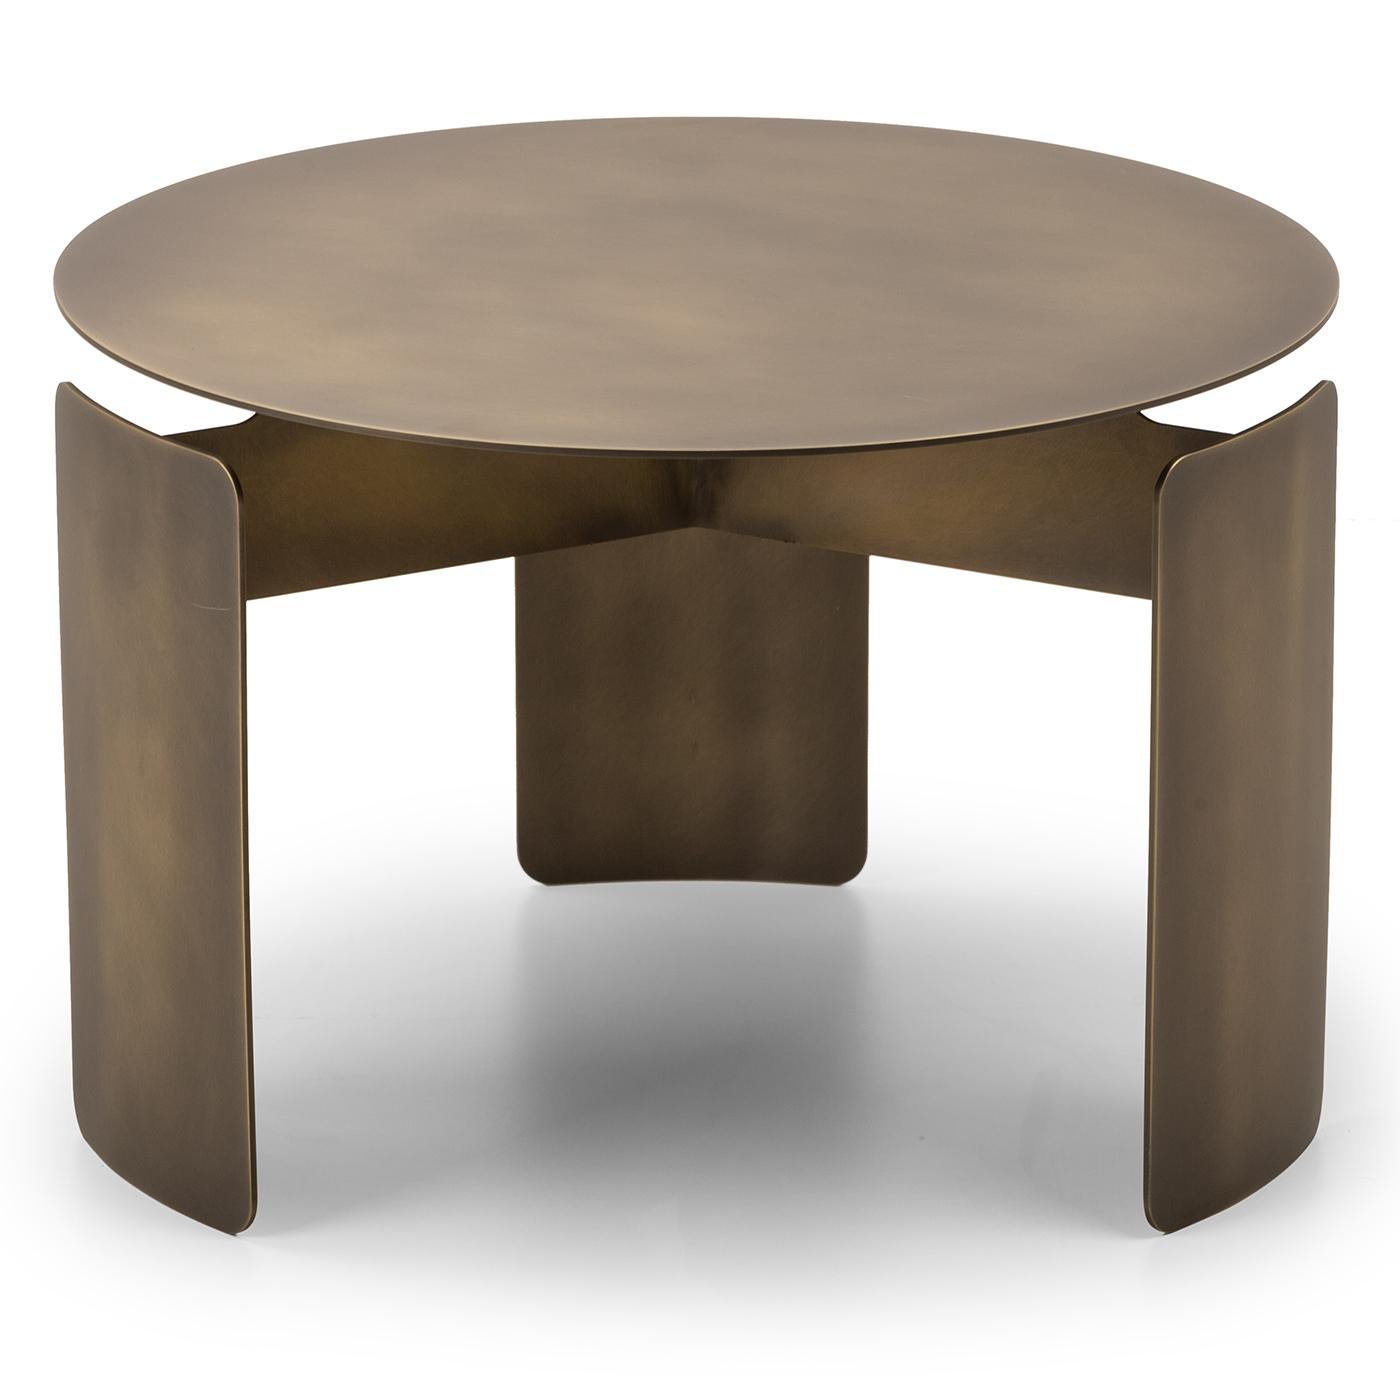 Perfectly expressing the harmonious balance of shapes, this side table of the Shirudo Collection by Finnish designer Elisa Honkanen is inspired by and named after ancient oriental shields. The burnished black stainless steel structure stands on